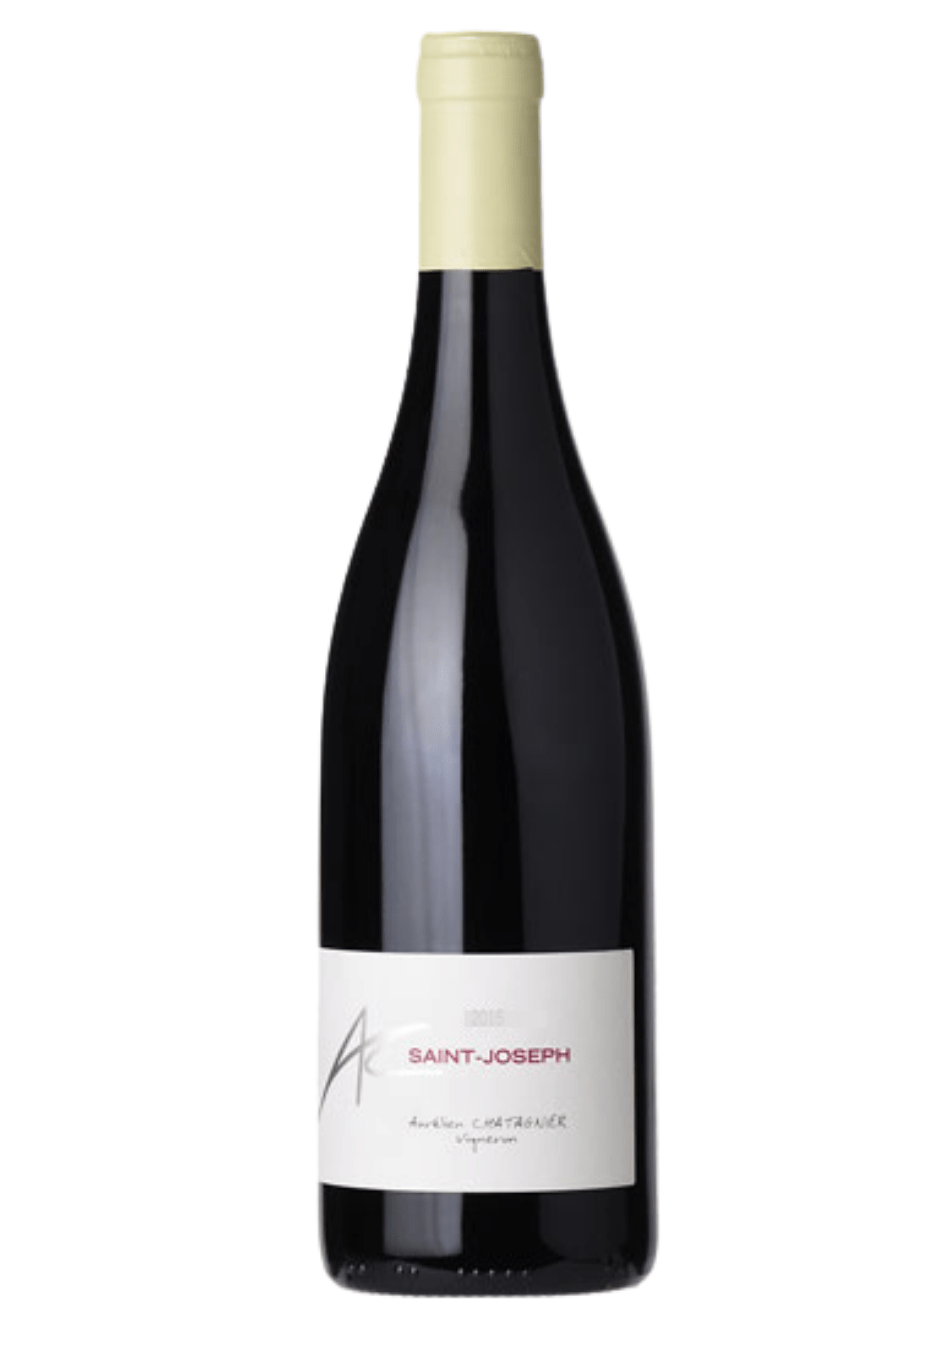 Shop Domaine Aurelien Chatagnier Domaine Aurelien Chatagnier Saint-Joseph La Sybarite Rouge 2018 online at PENTICTON artisanal French wine store in Hong Kong. Discover other French wines, promotions, workshops and featured offers at pentictonpacific.com 